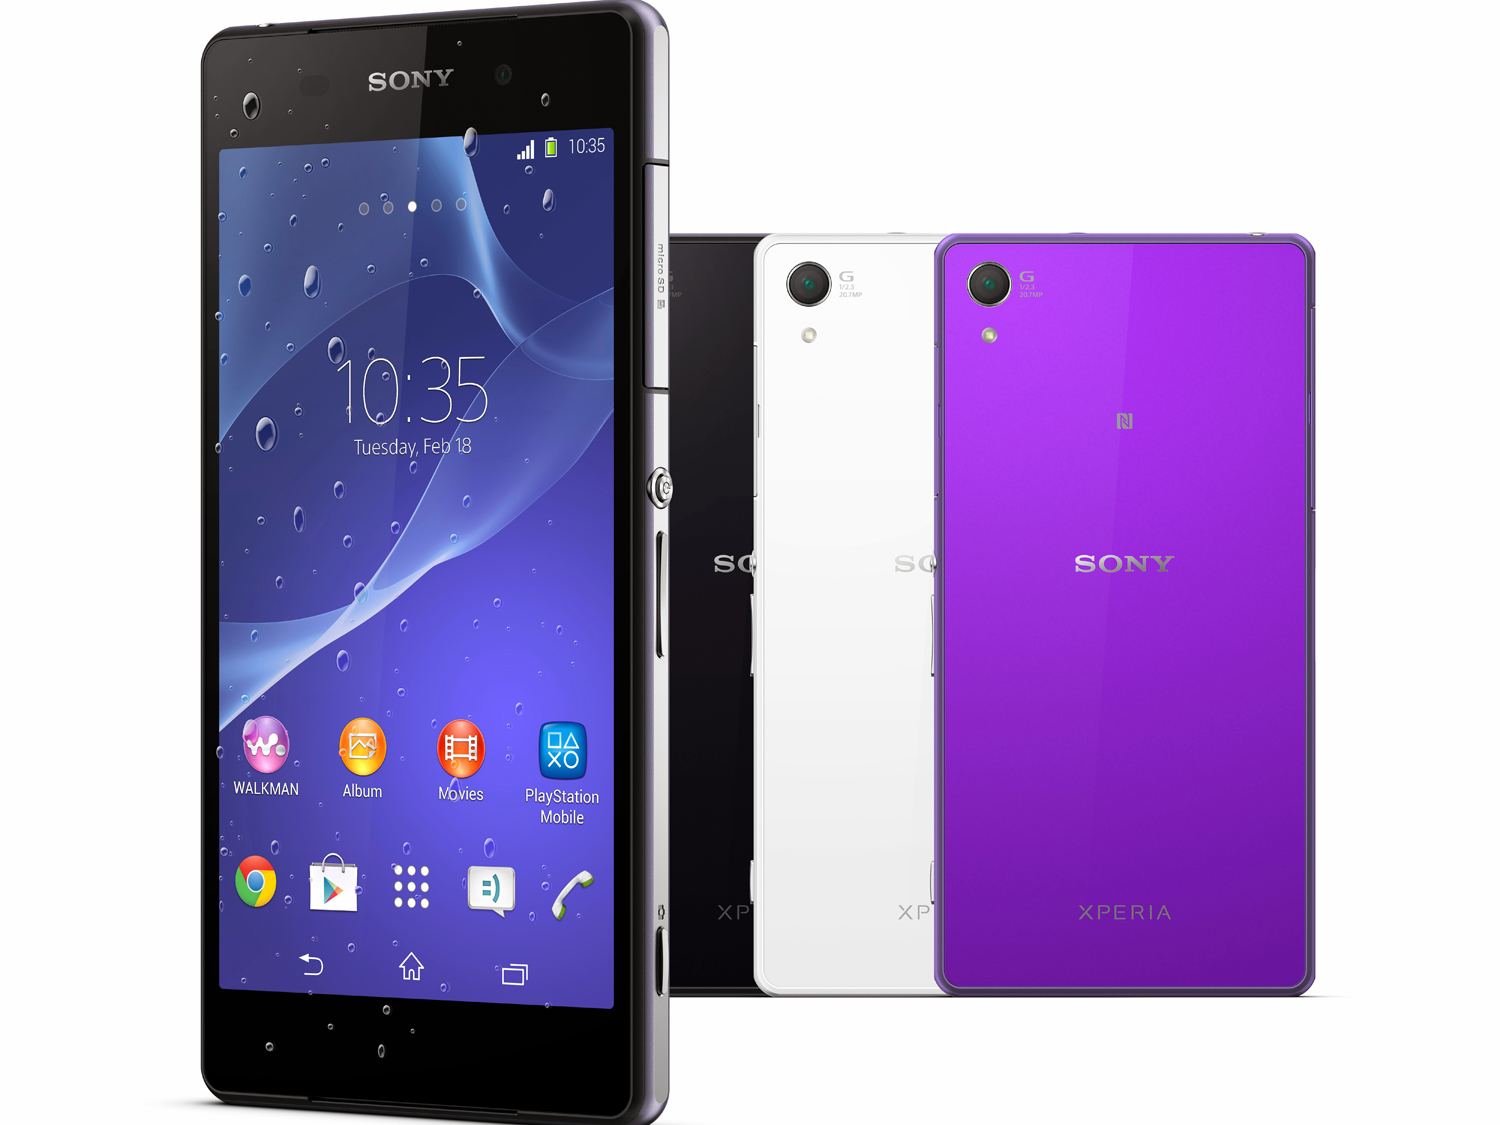 Sony Xperia Z2 Smartphone Review - NotebookCheck.net